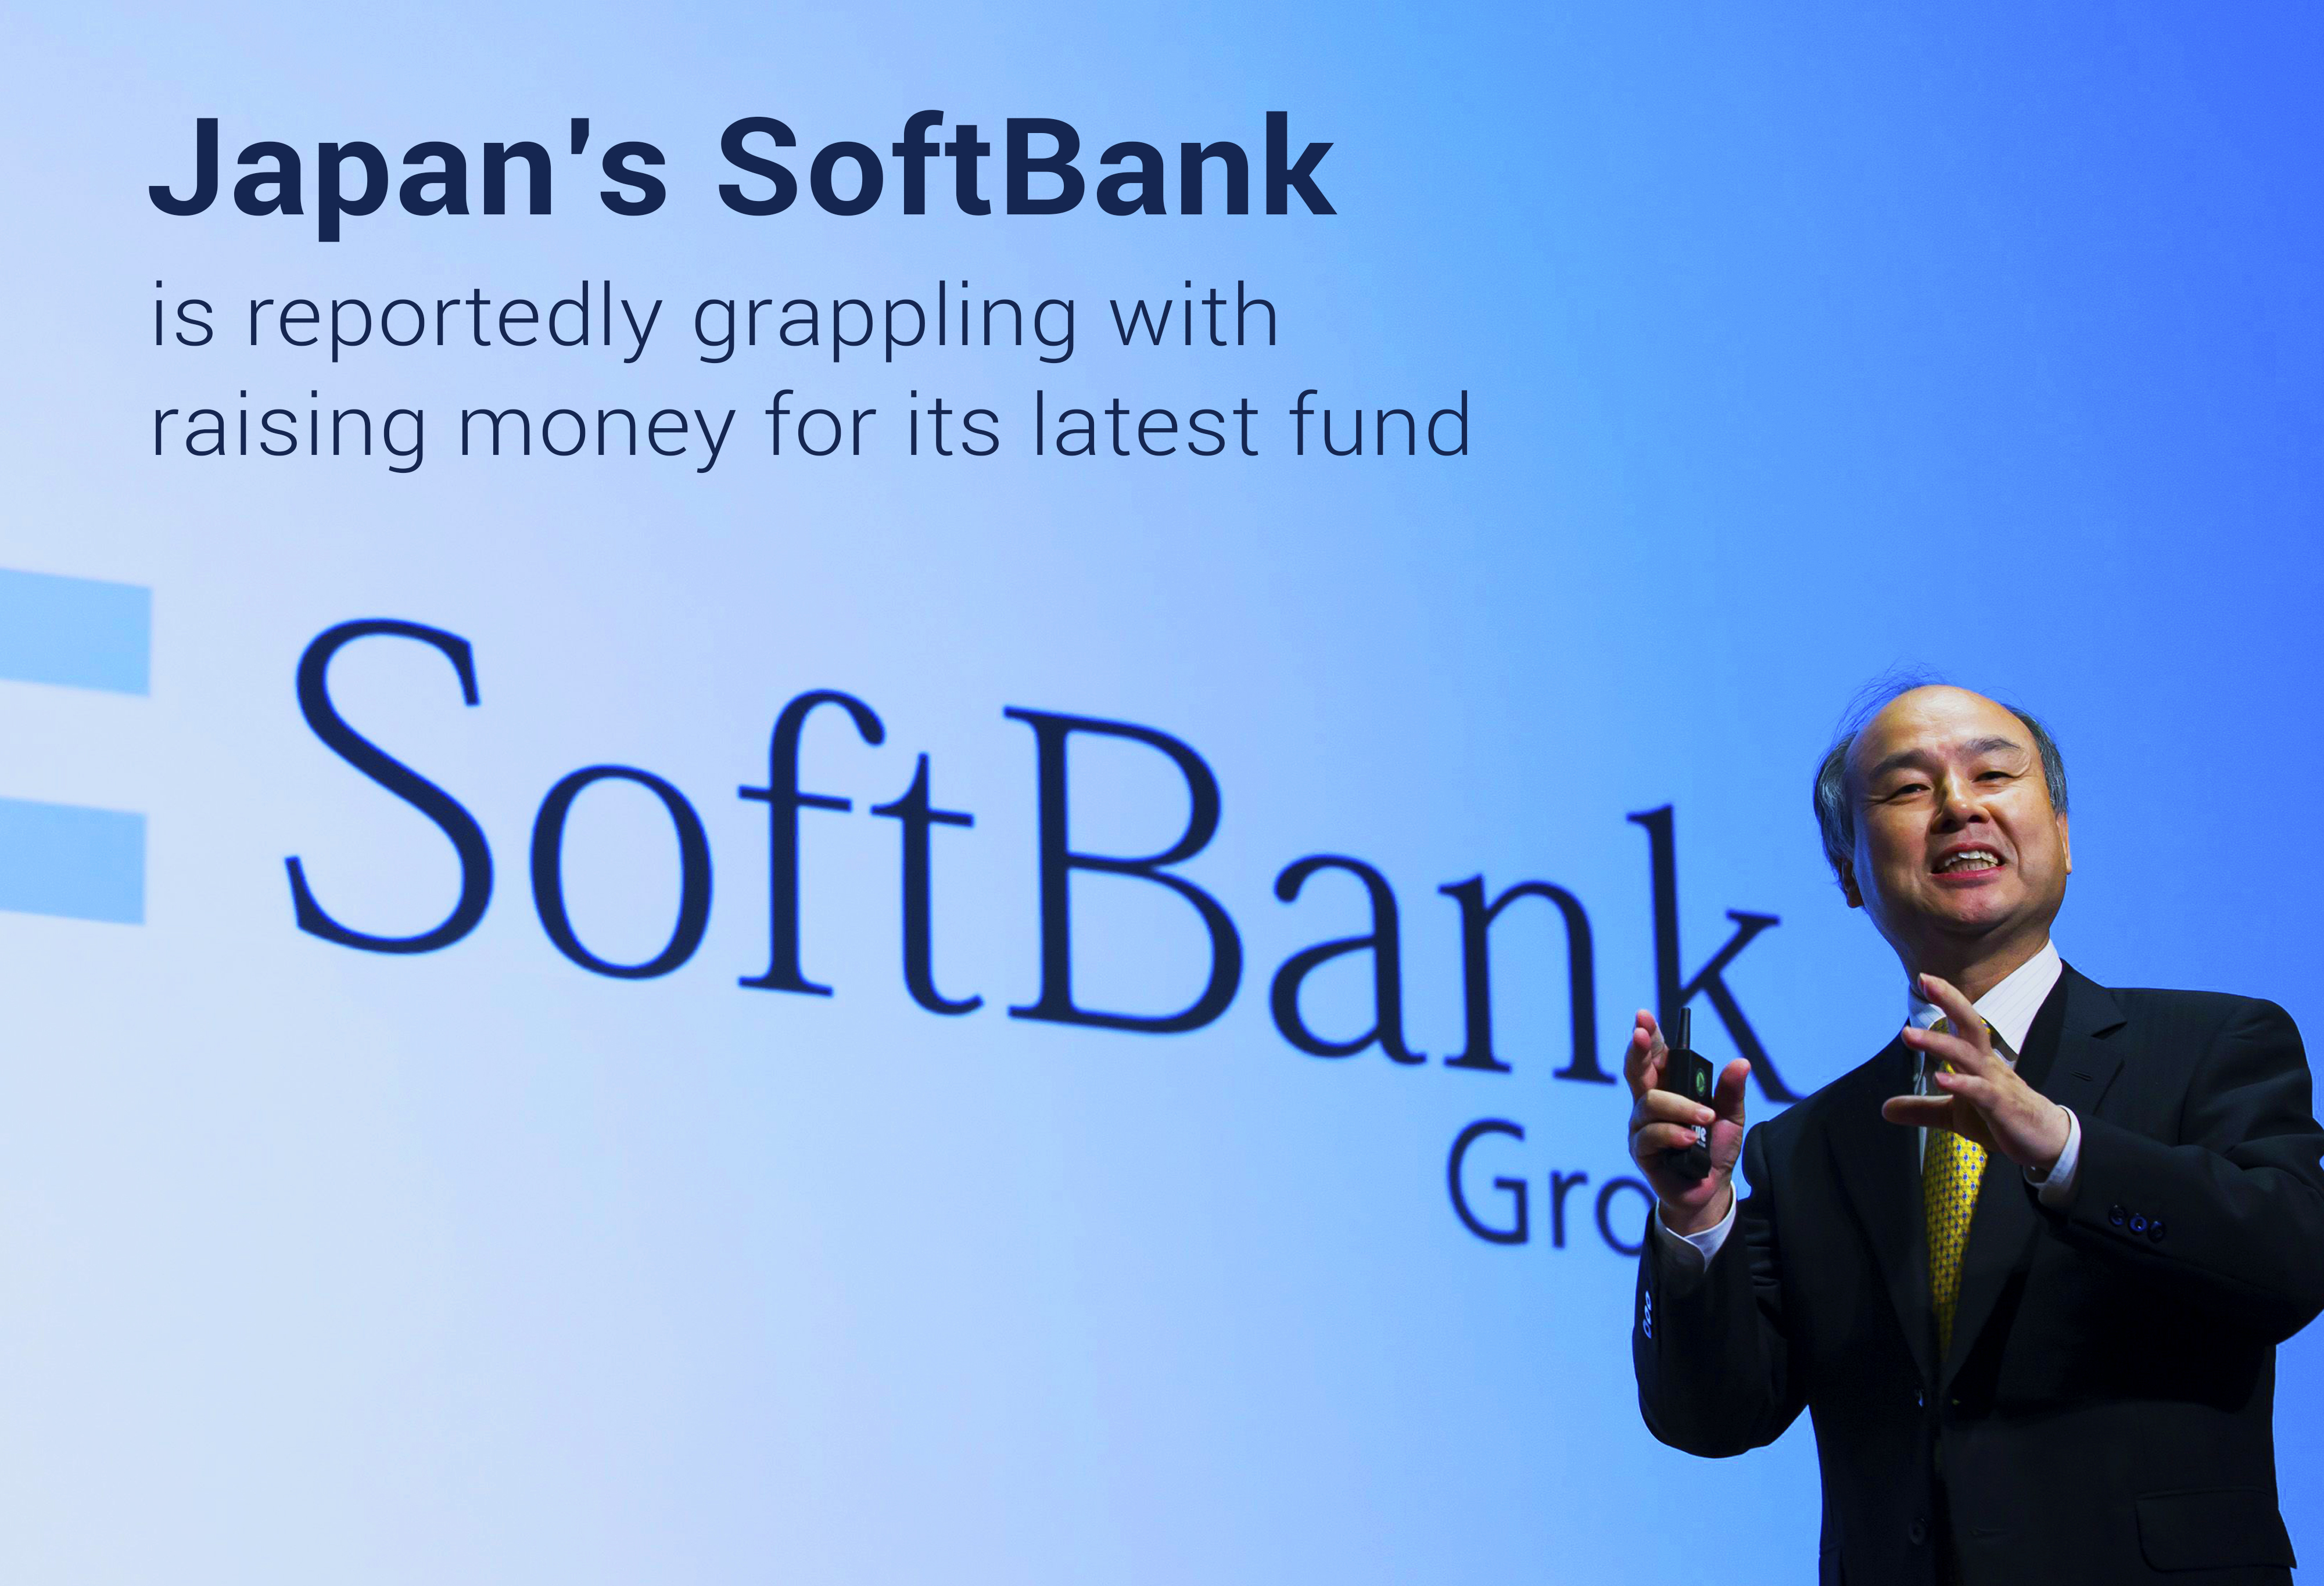 Japan's Softbank is grappling with Money Raising for Recent Fund